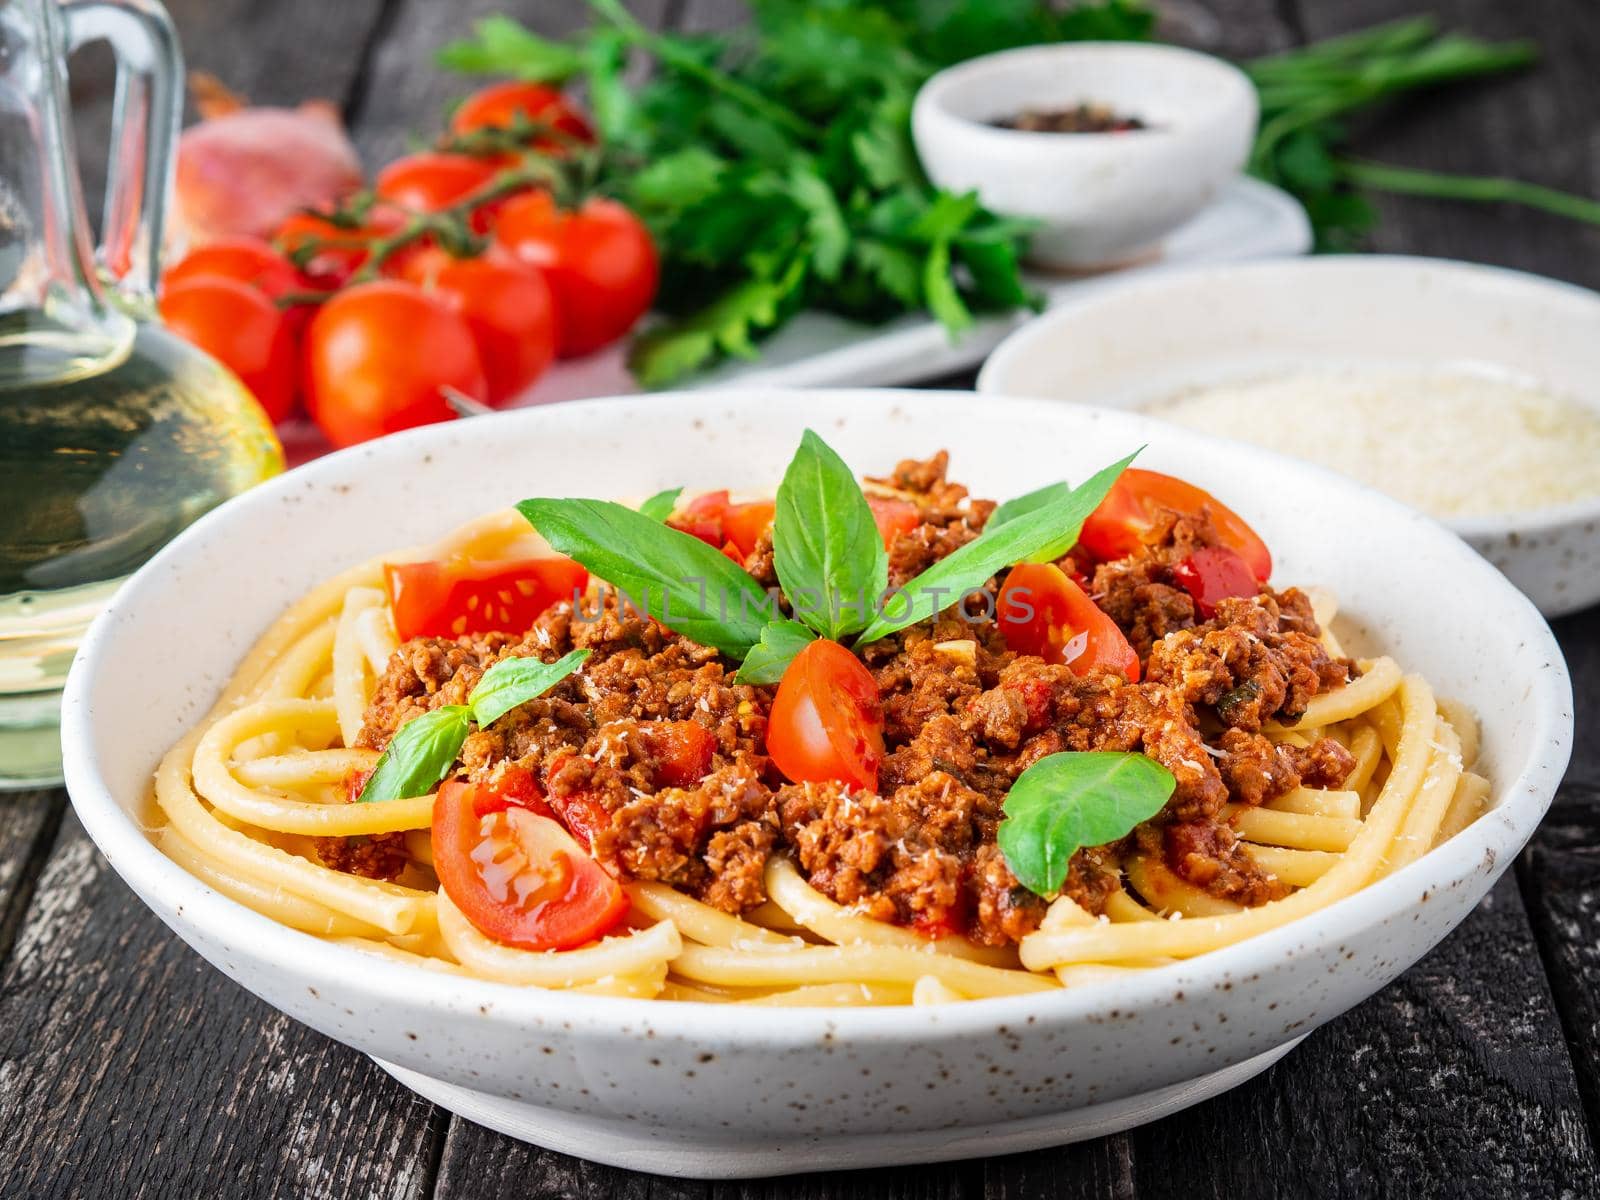 pasta bolognese with tomato sauce, ground minced beef, basil leaves on background by NataBene